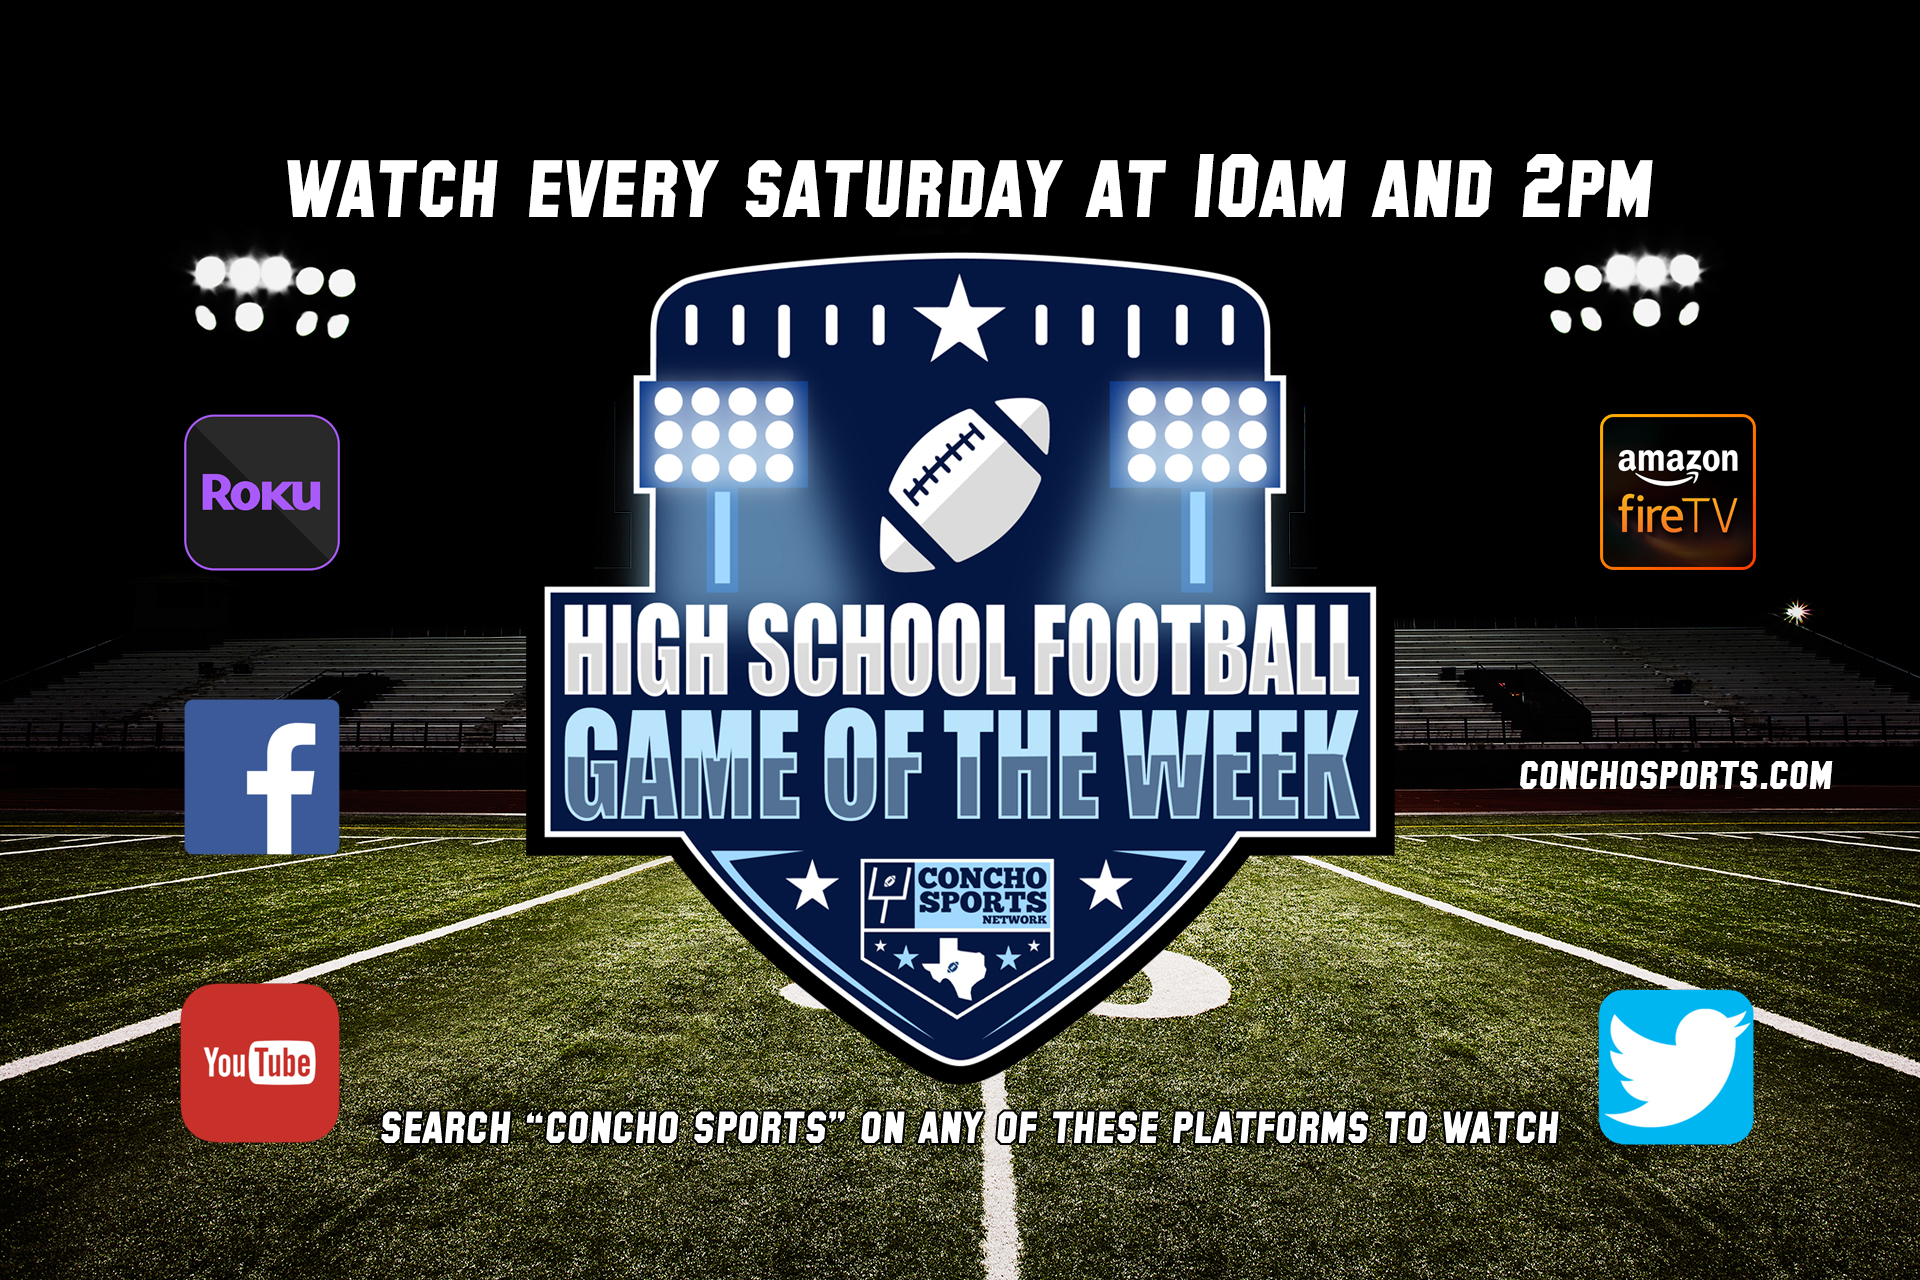 Announcing the televised CSN High School Football Game of the Week